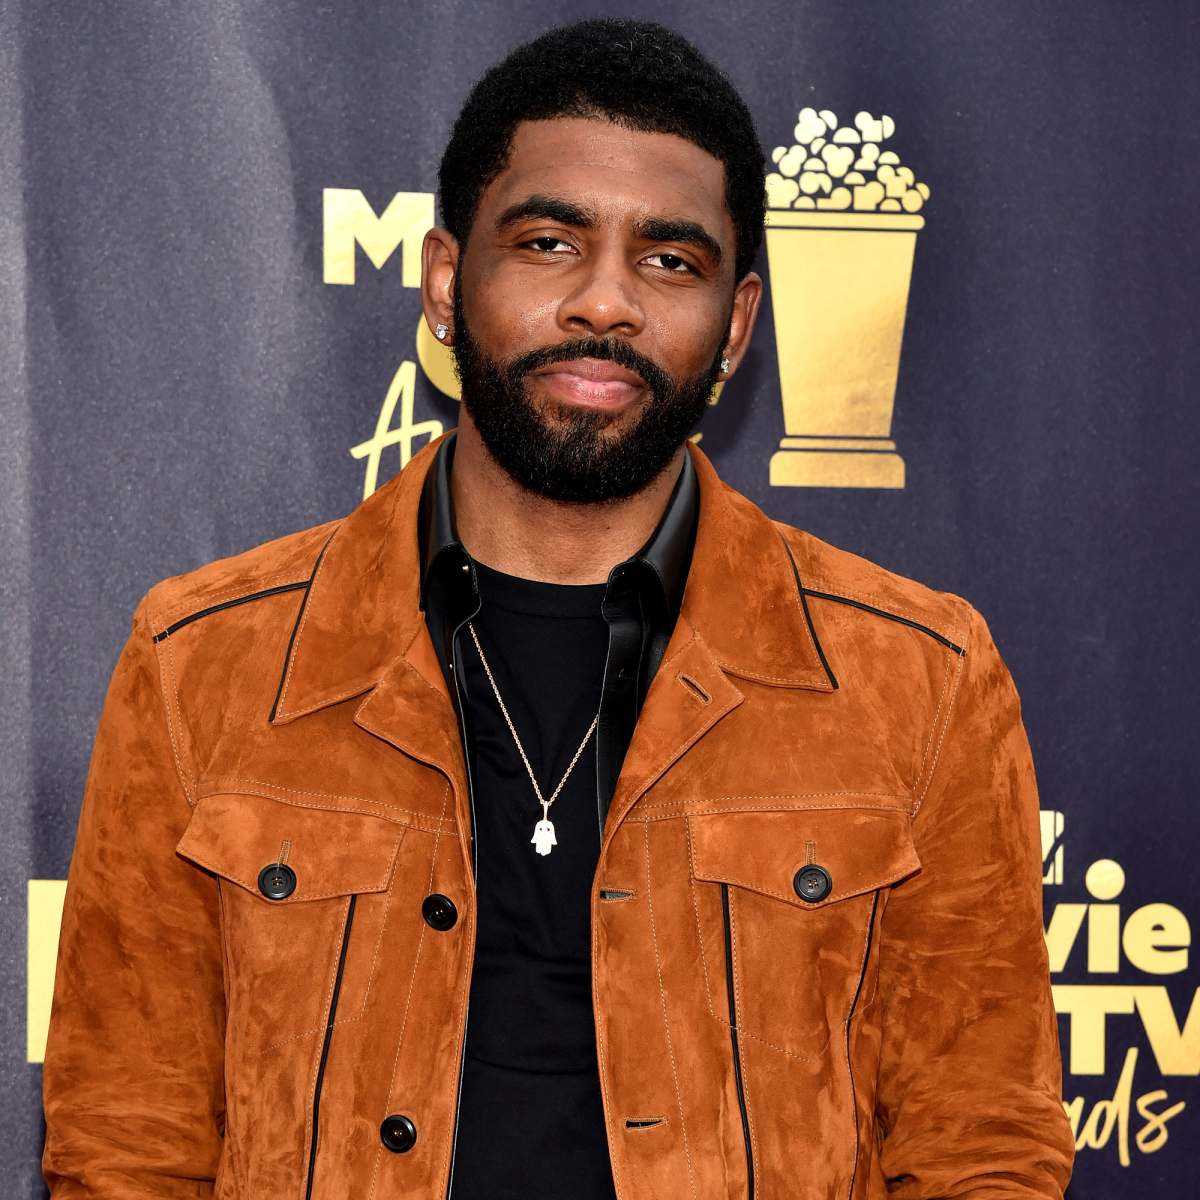 Kyrie Irving apologizes after profane dismissal of Thanksgiving